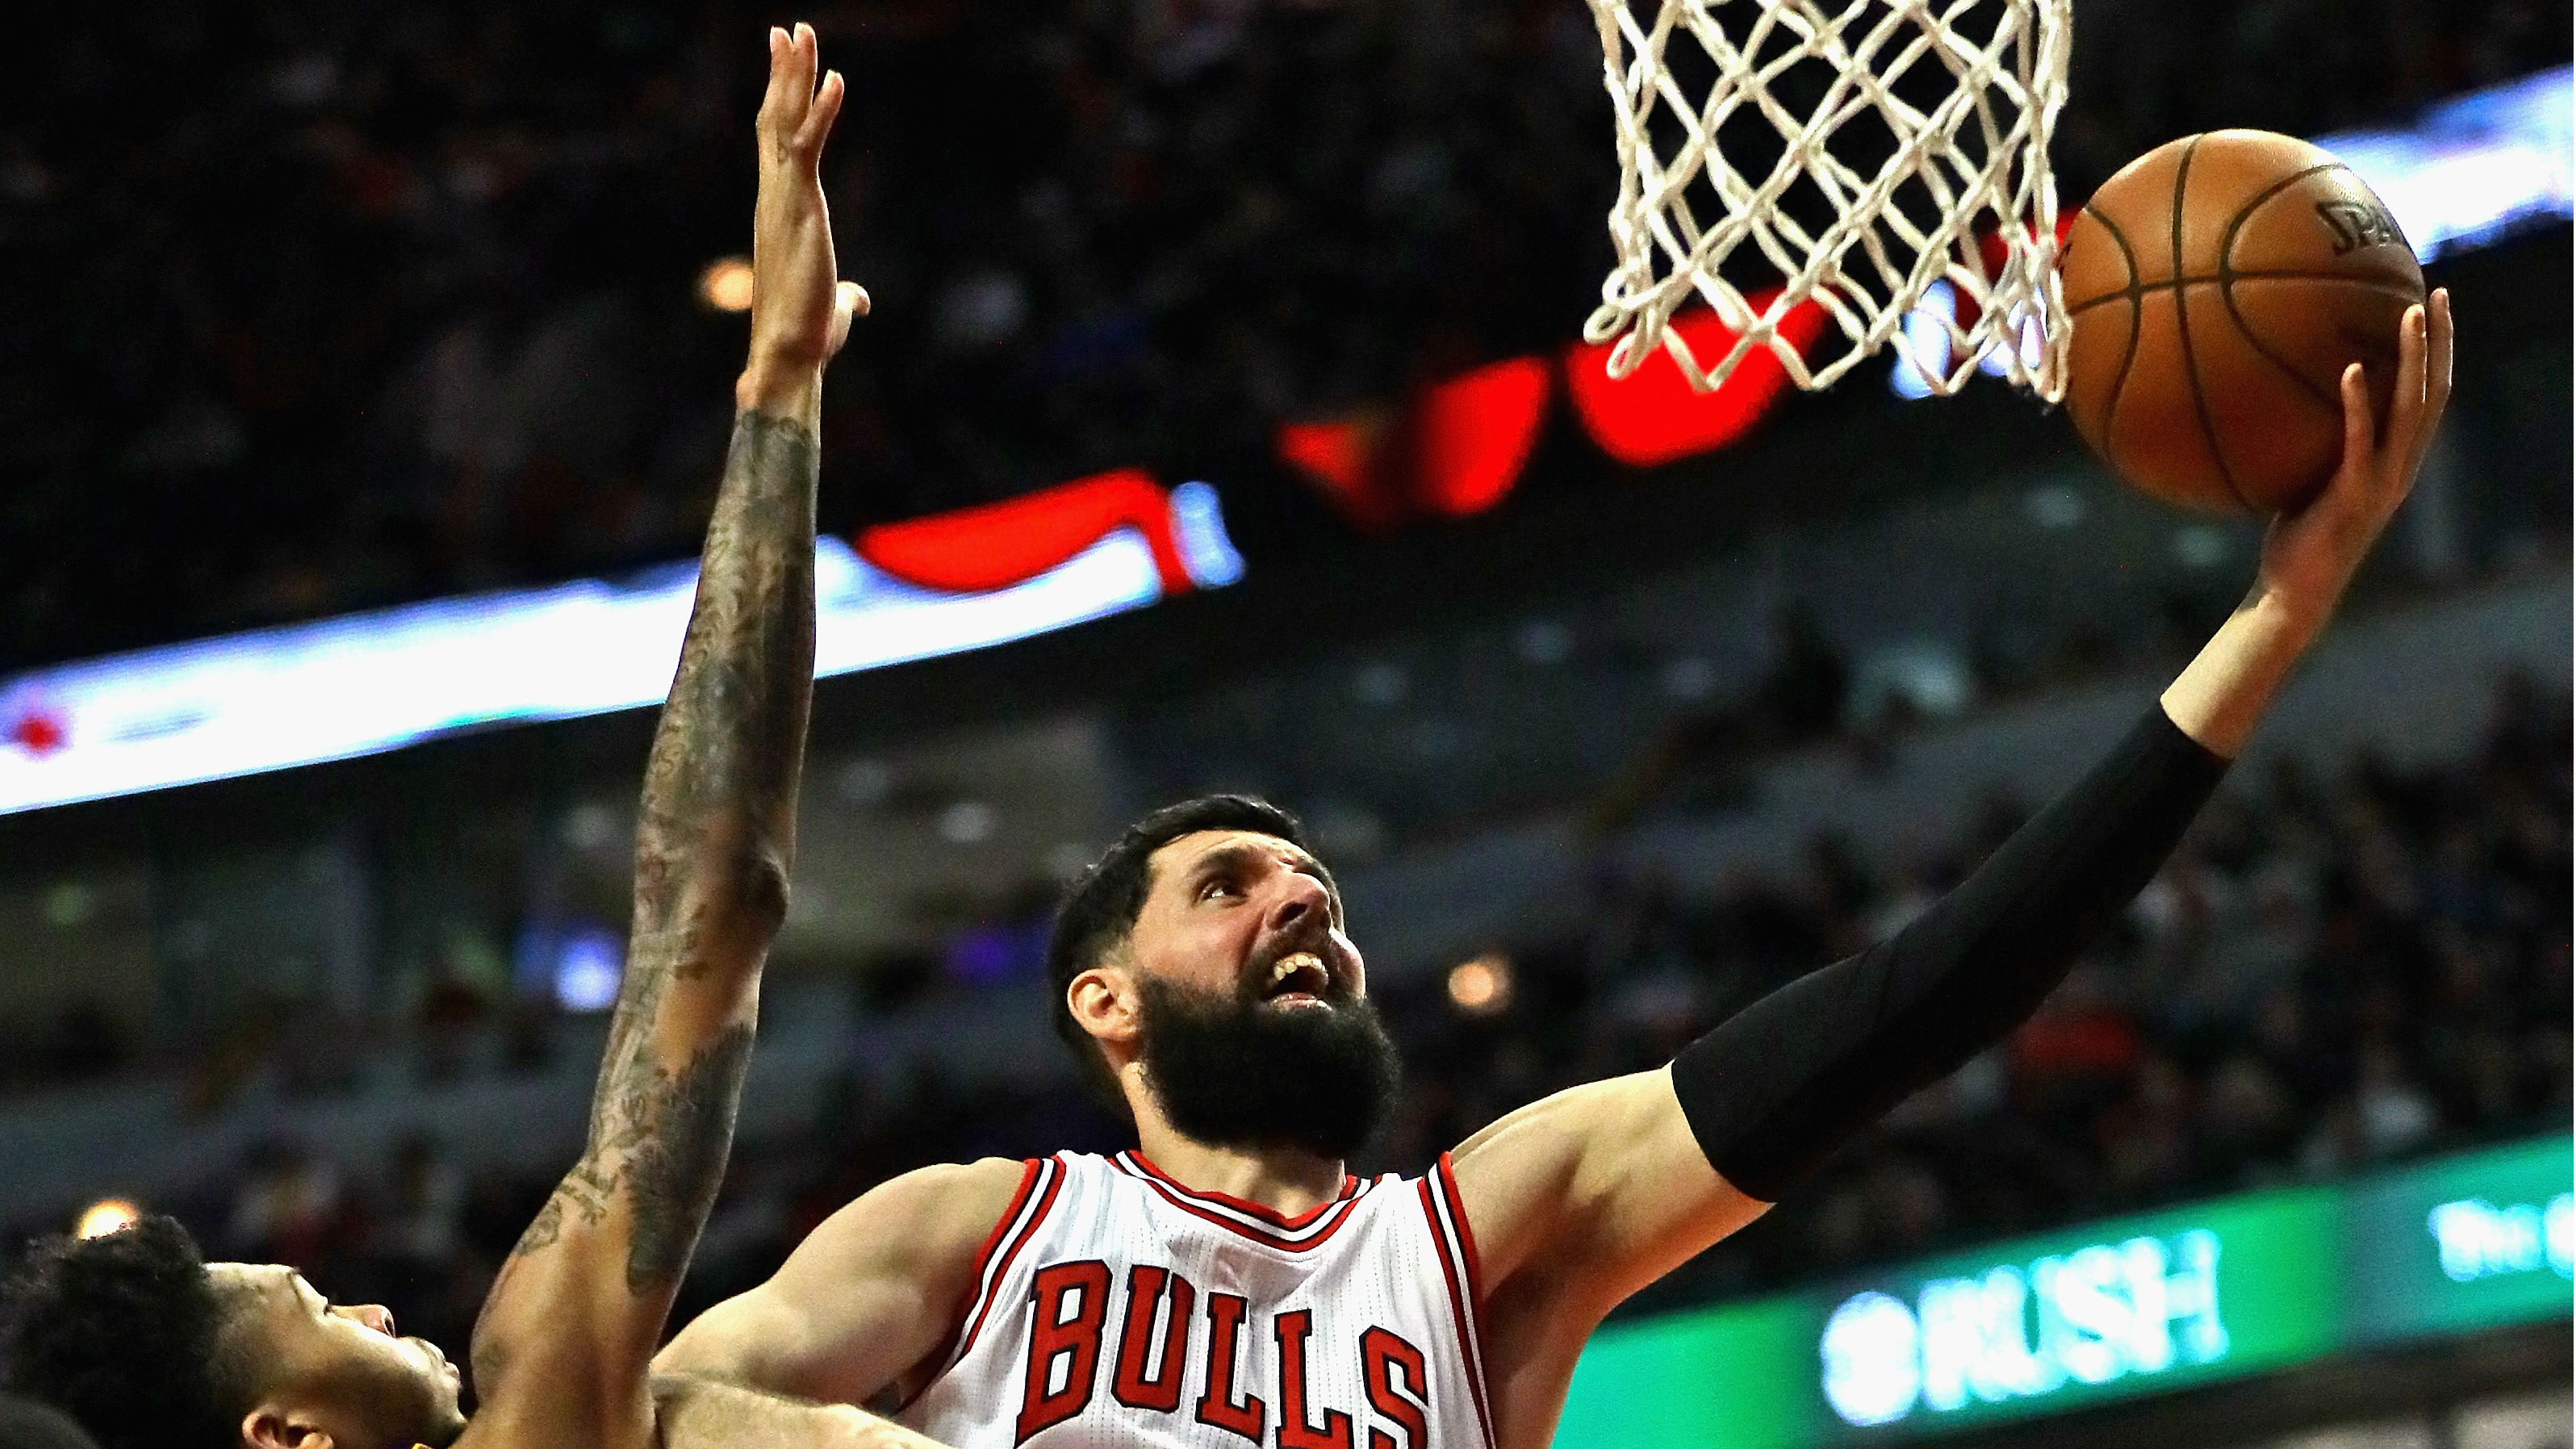 Bulls continue to wait for inconsistent Nikola Mirotic to get going | NBA | Sporting News